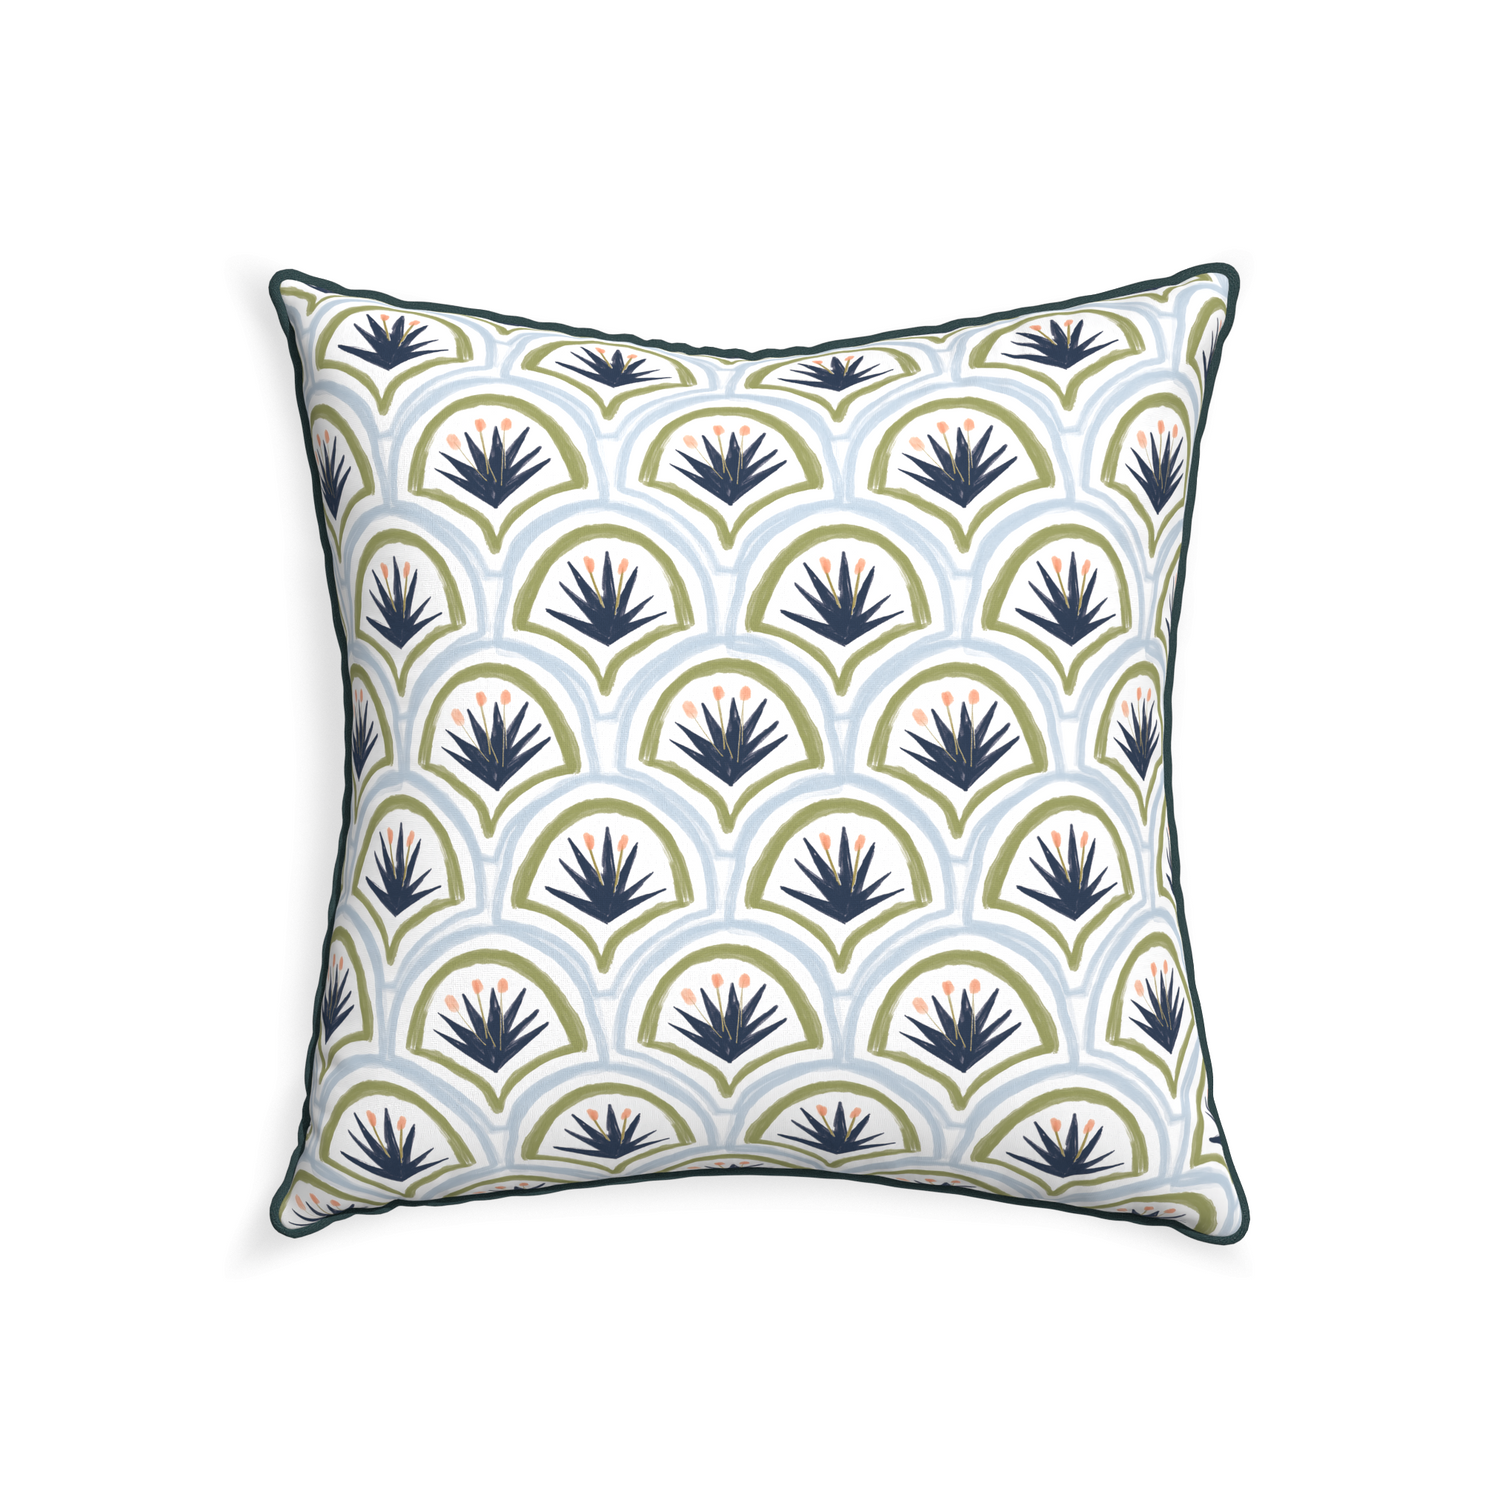 22-square thatcher midnight custom art deco palm patternpillow with p piping on white background